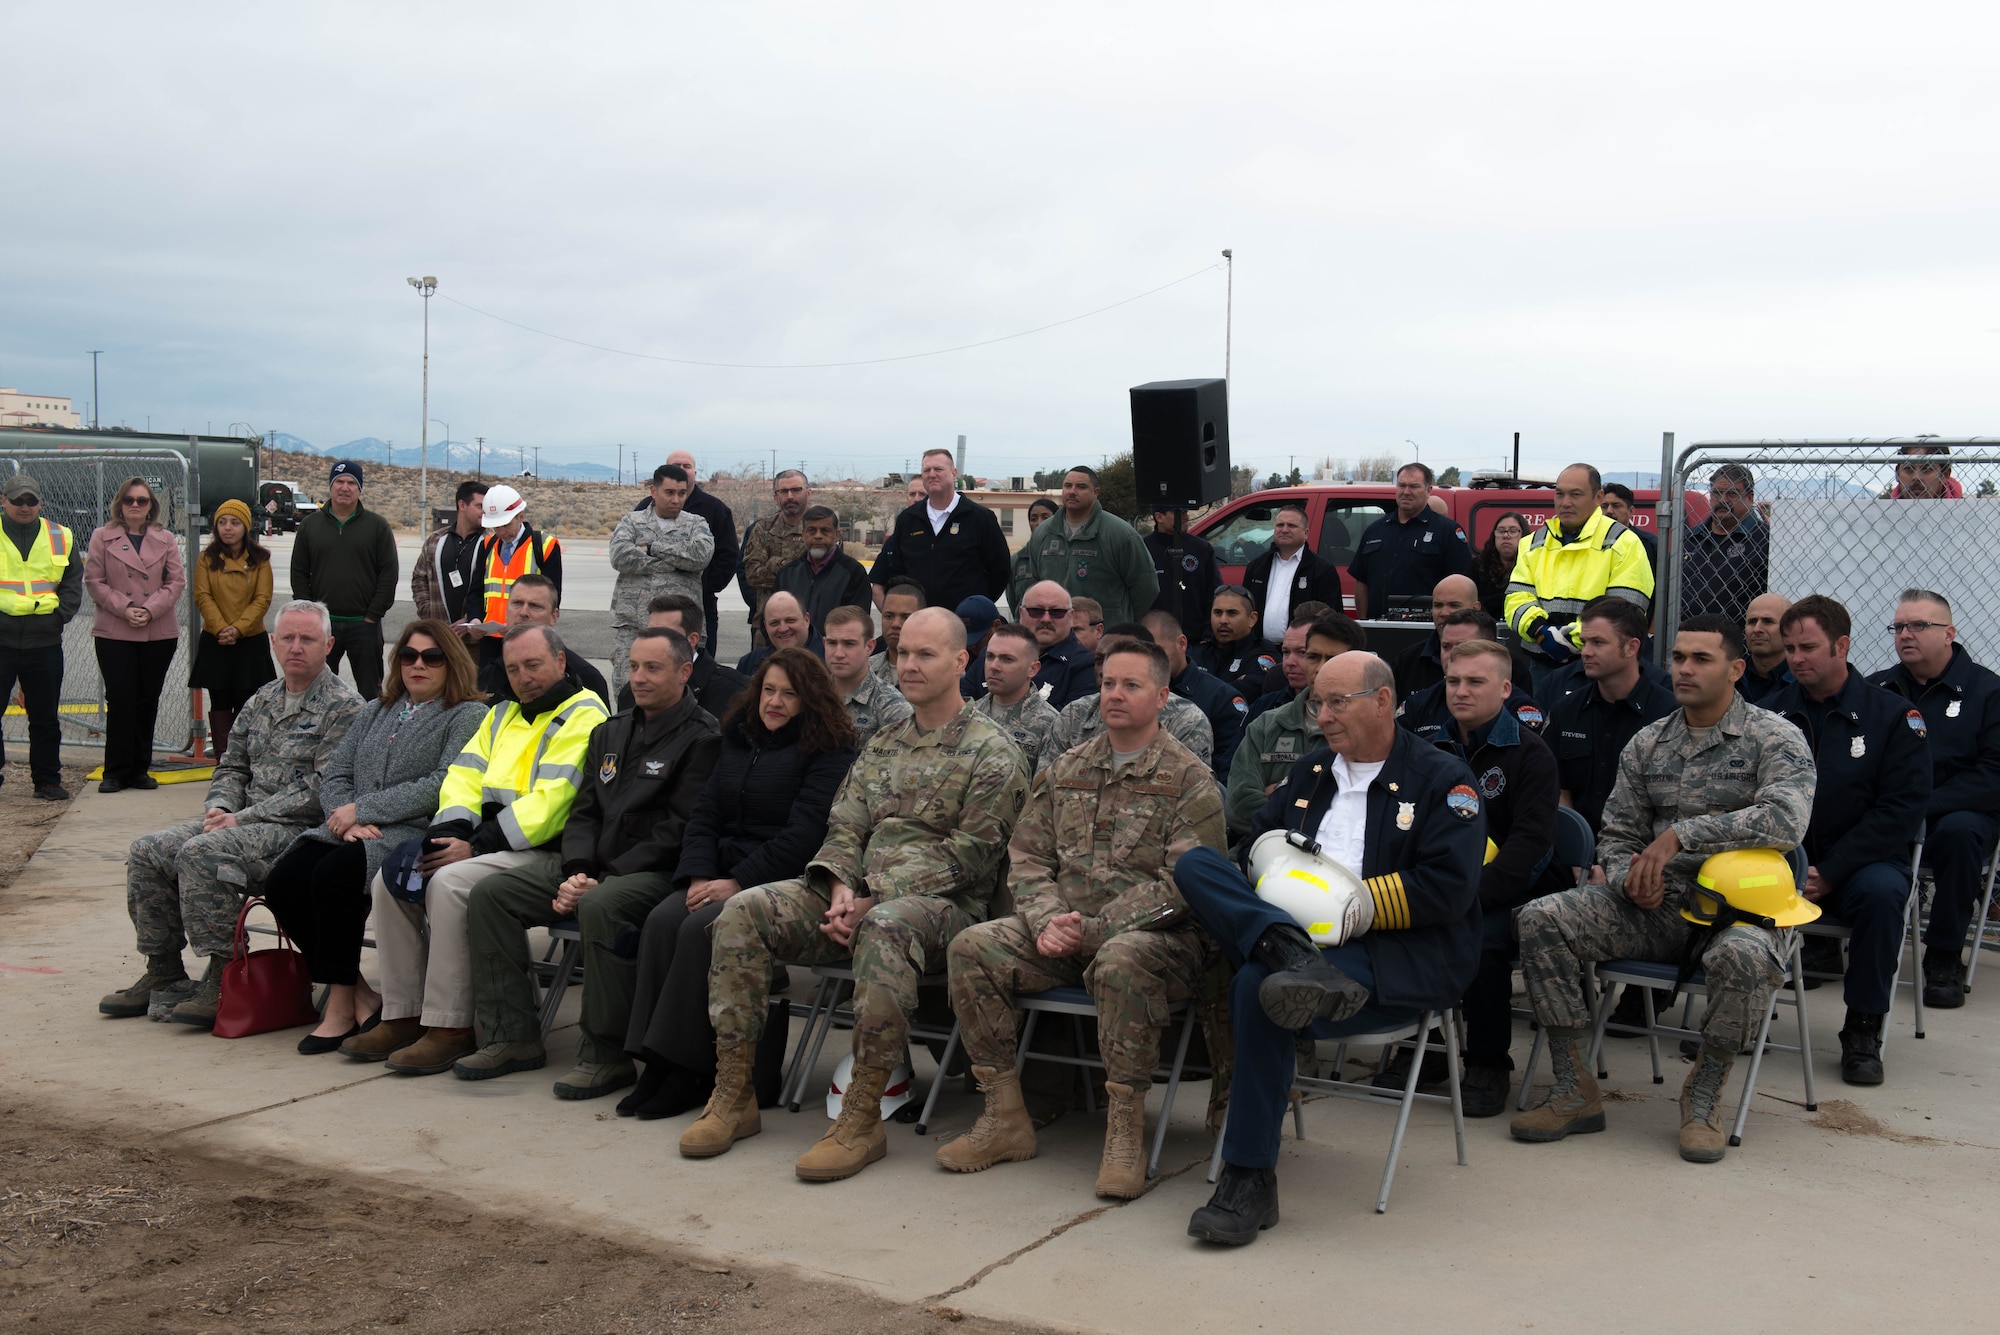 Base leadership joined members of the 412th Civil Engineer Group and its firefighters, along with representatives from the U.S. Army Corps of Engineers and Defense Logistics Agency, to break ground on a new fire station on the flightline Dec. 14, 2018. (U.S. Air Force photo by Joe Jones)